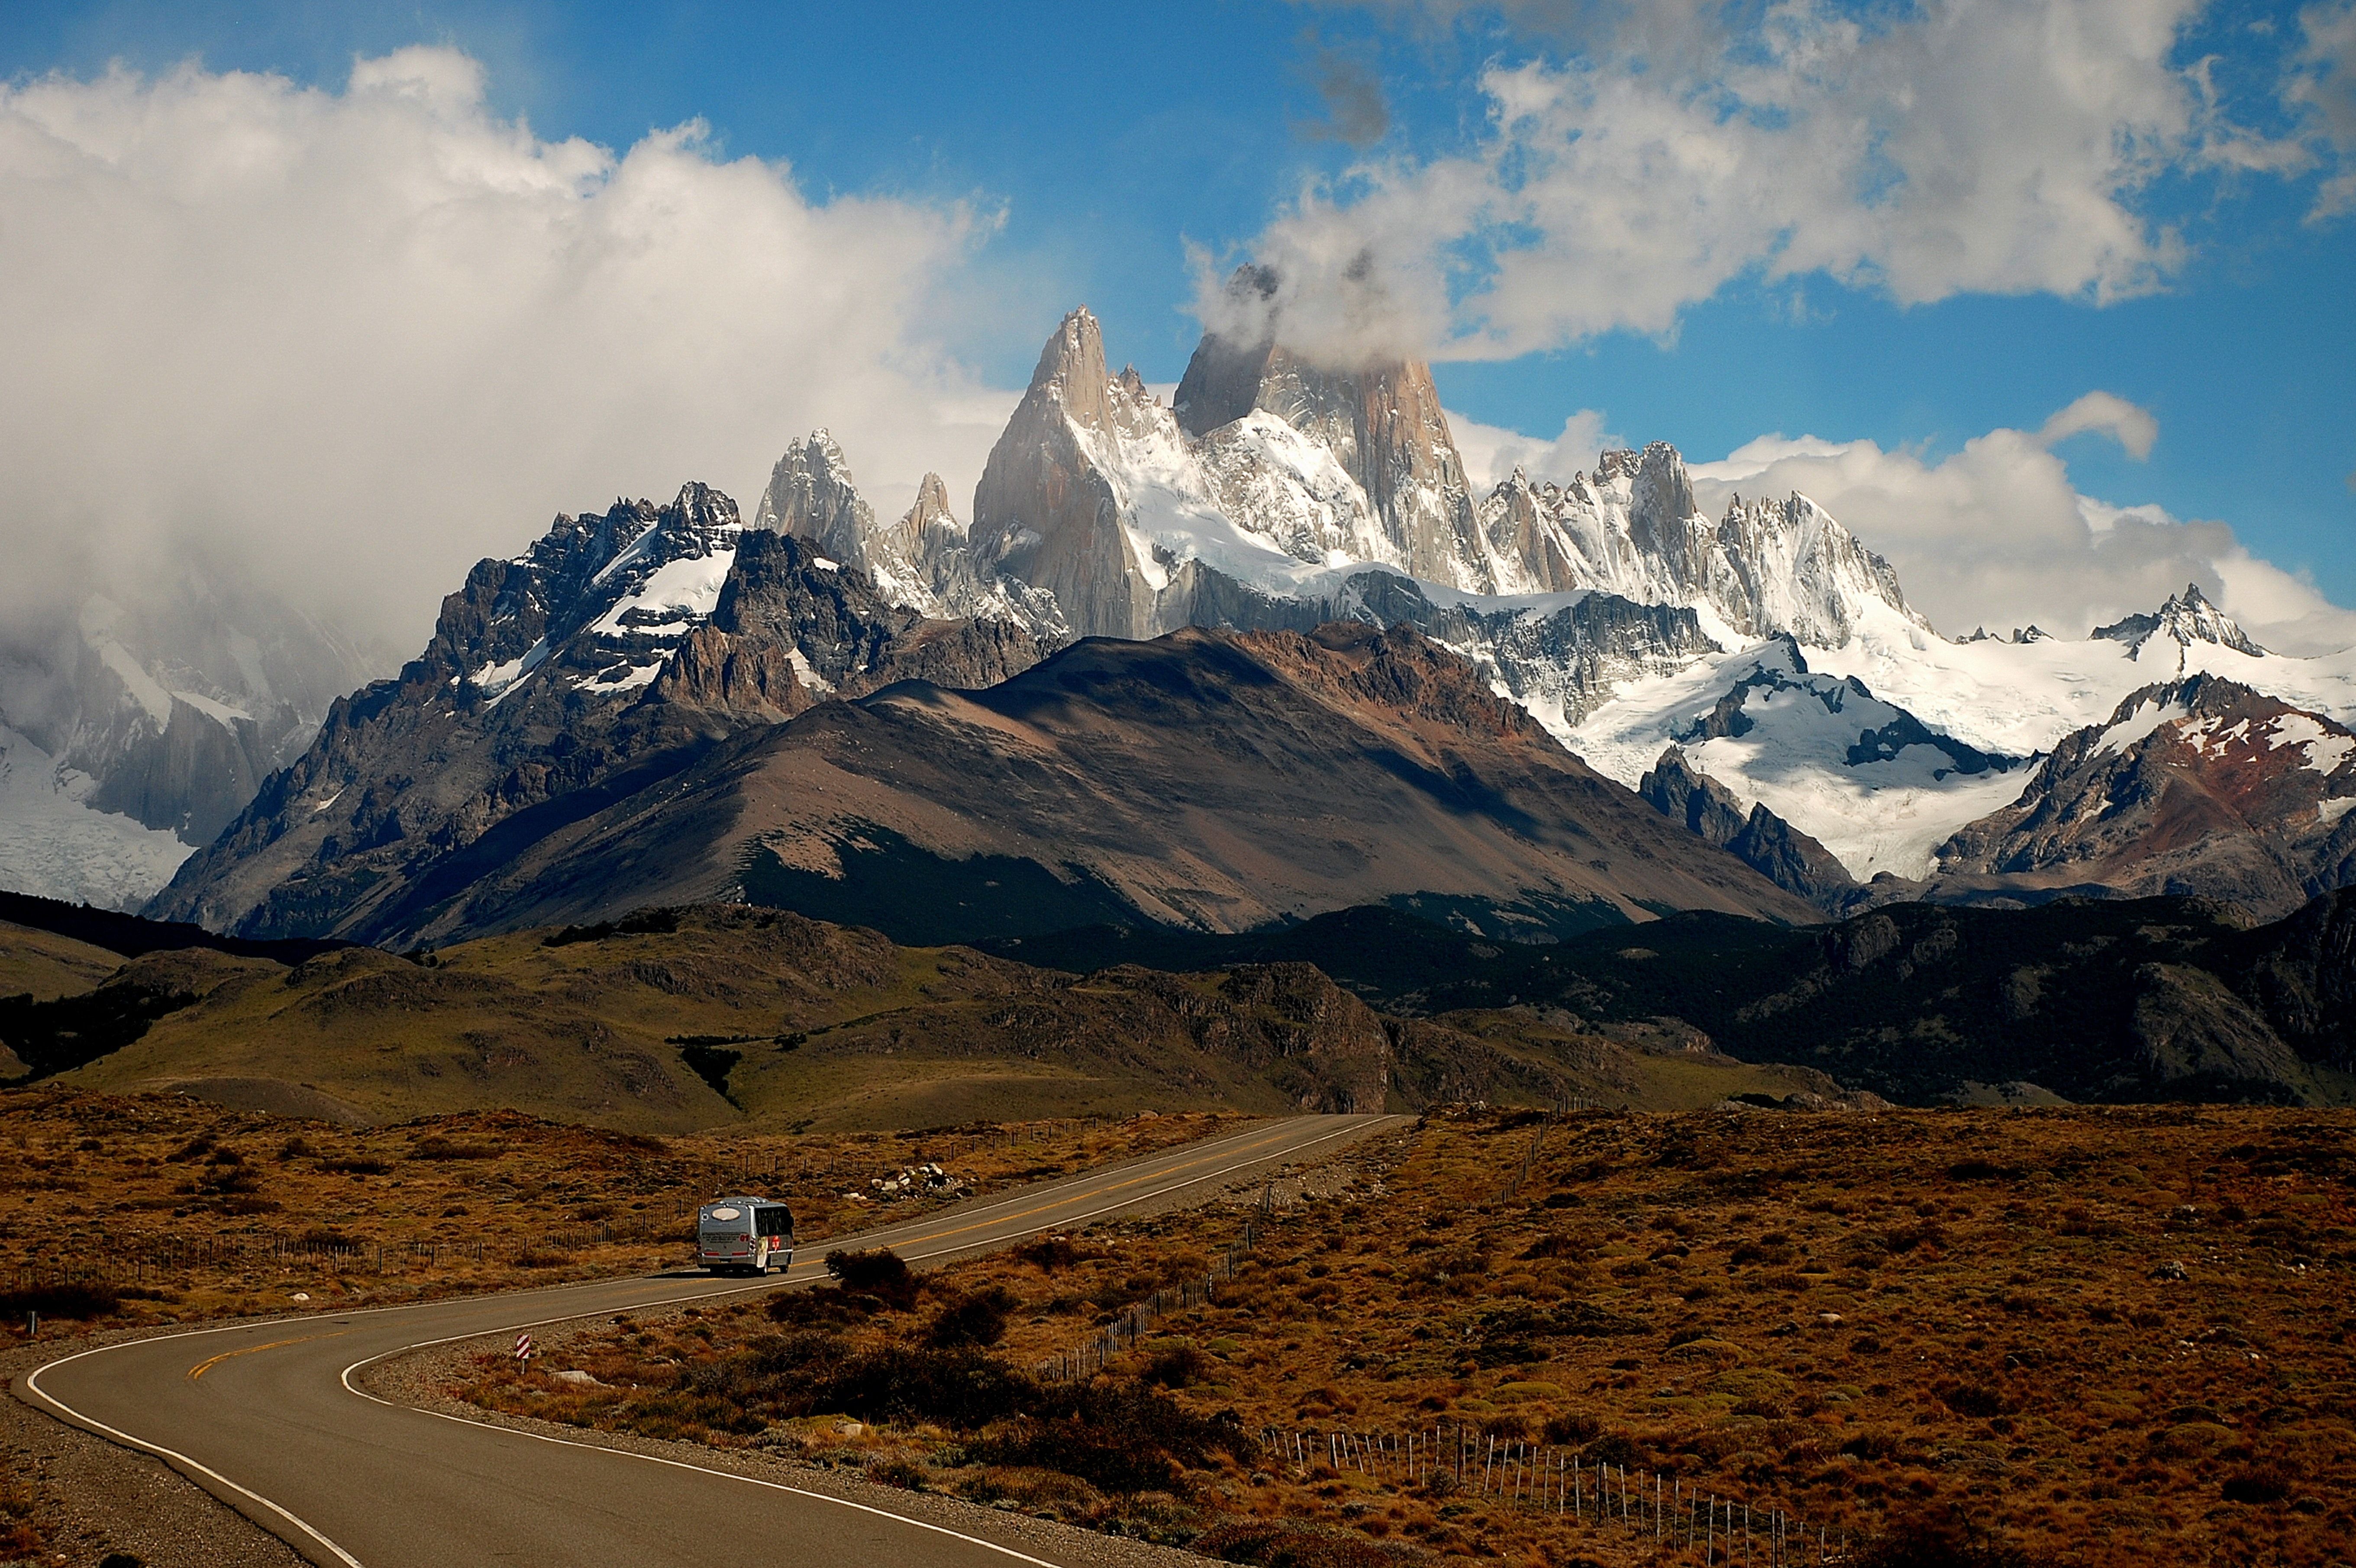 Patagonia mountainscape in Chile